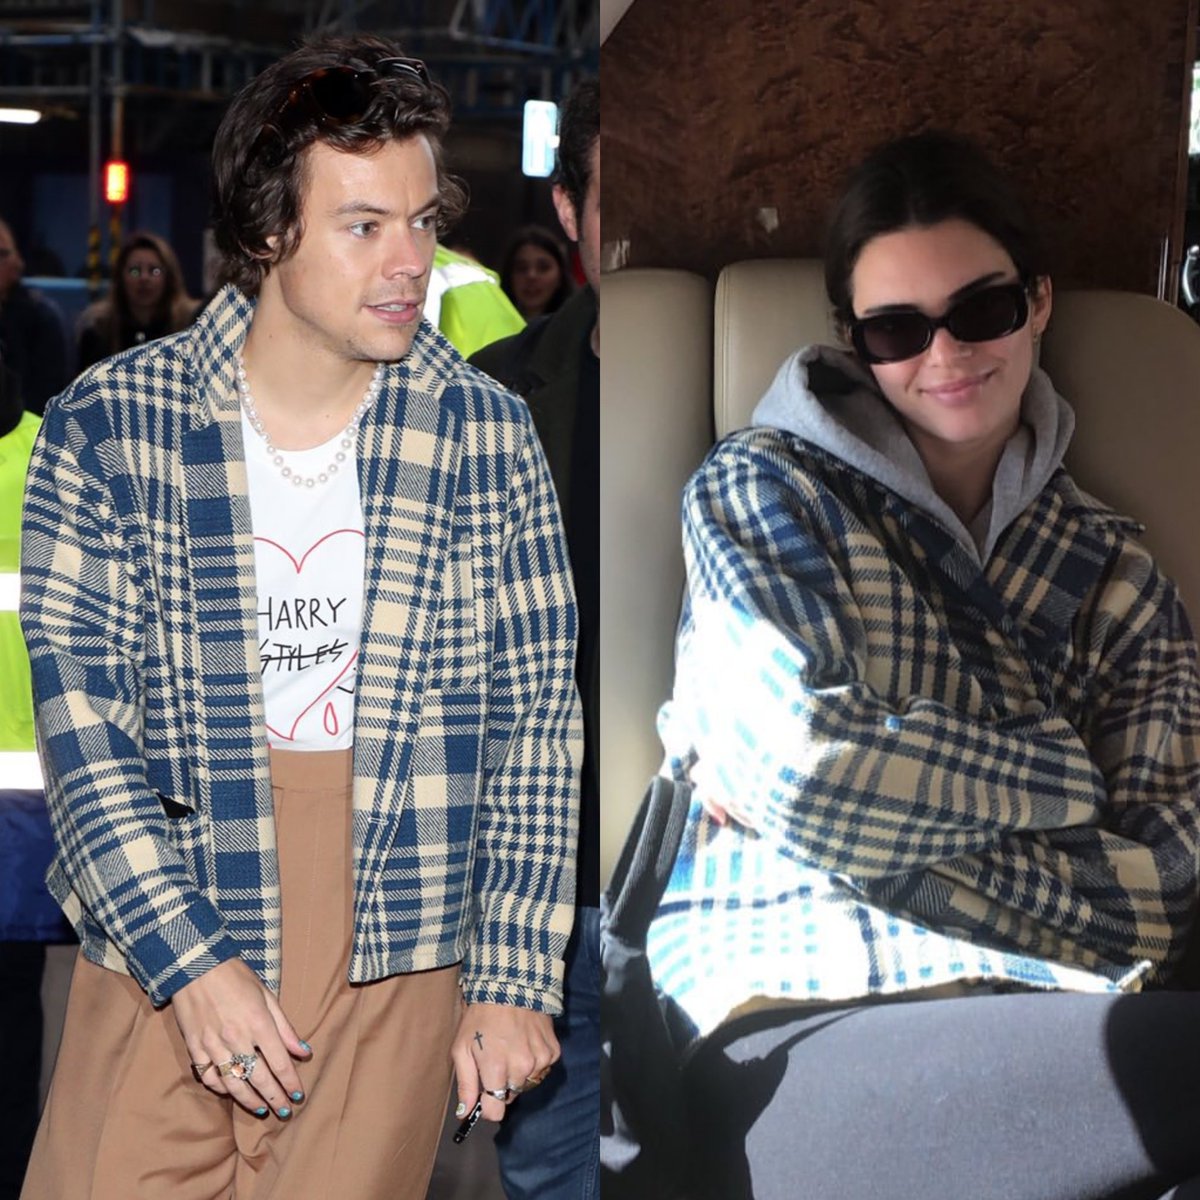 November 2019: They were seen wearing the same jacket.